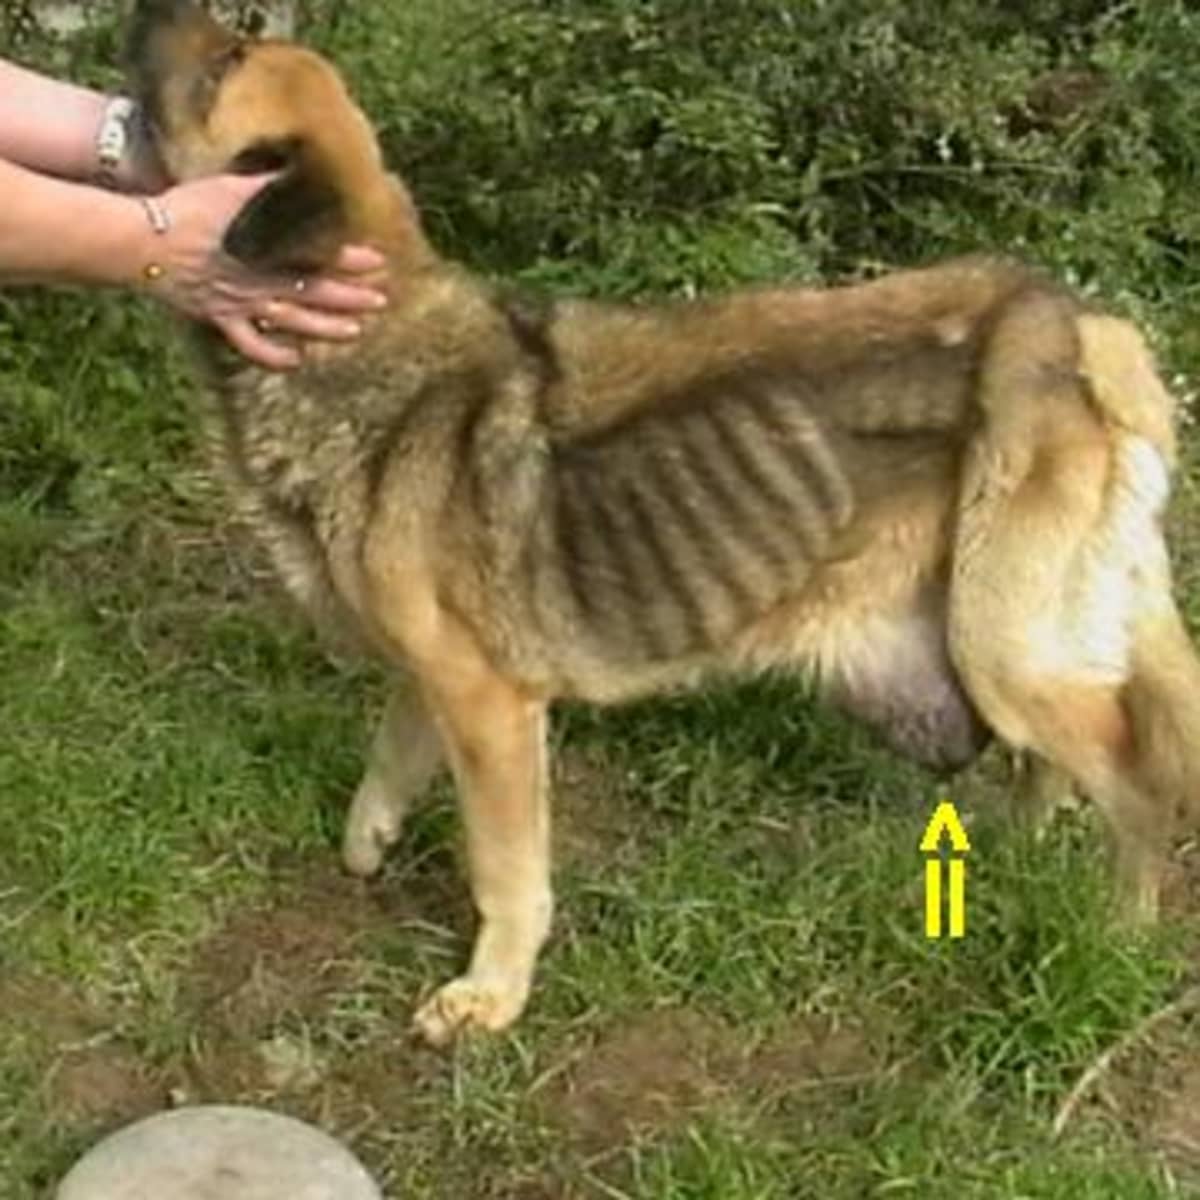 is mammary cancer in dogs painful